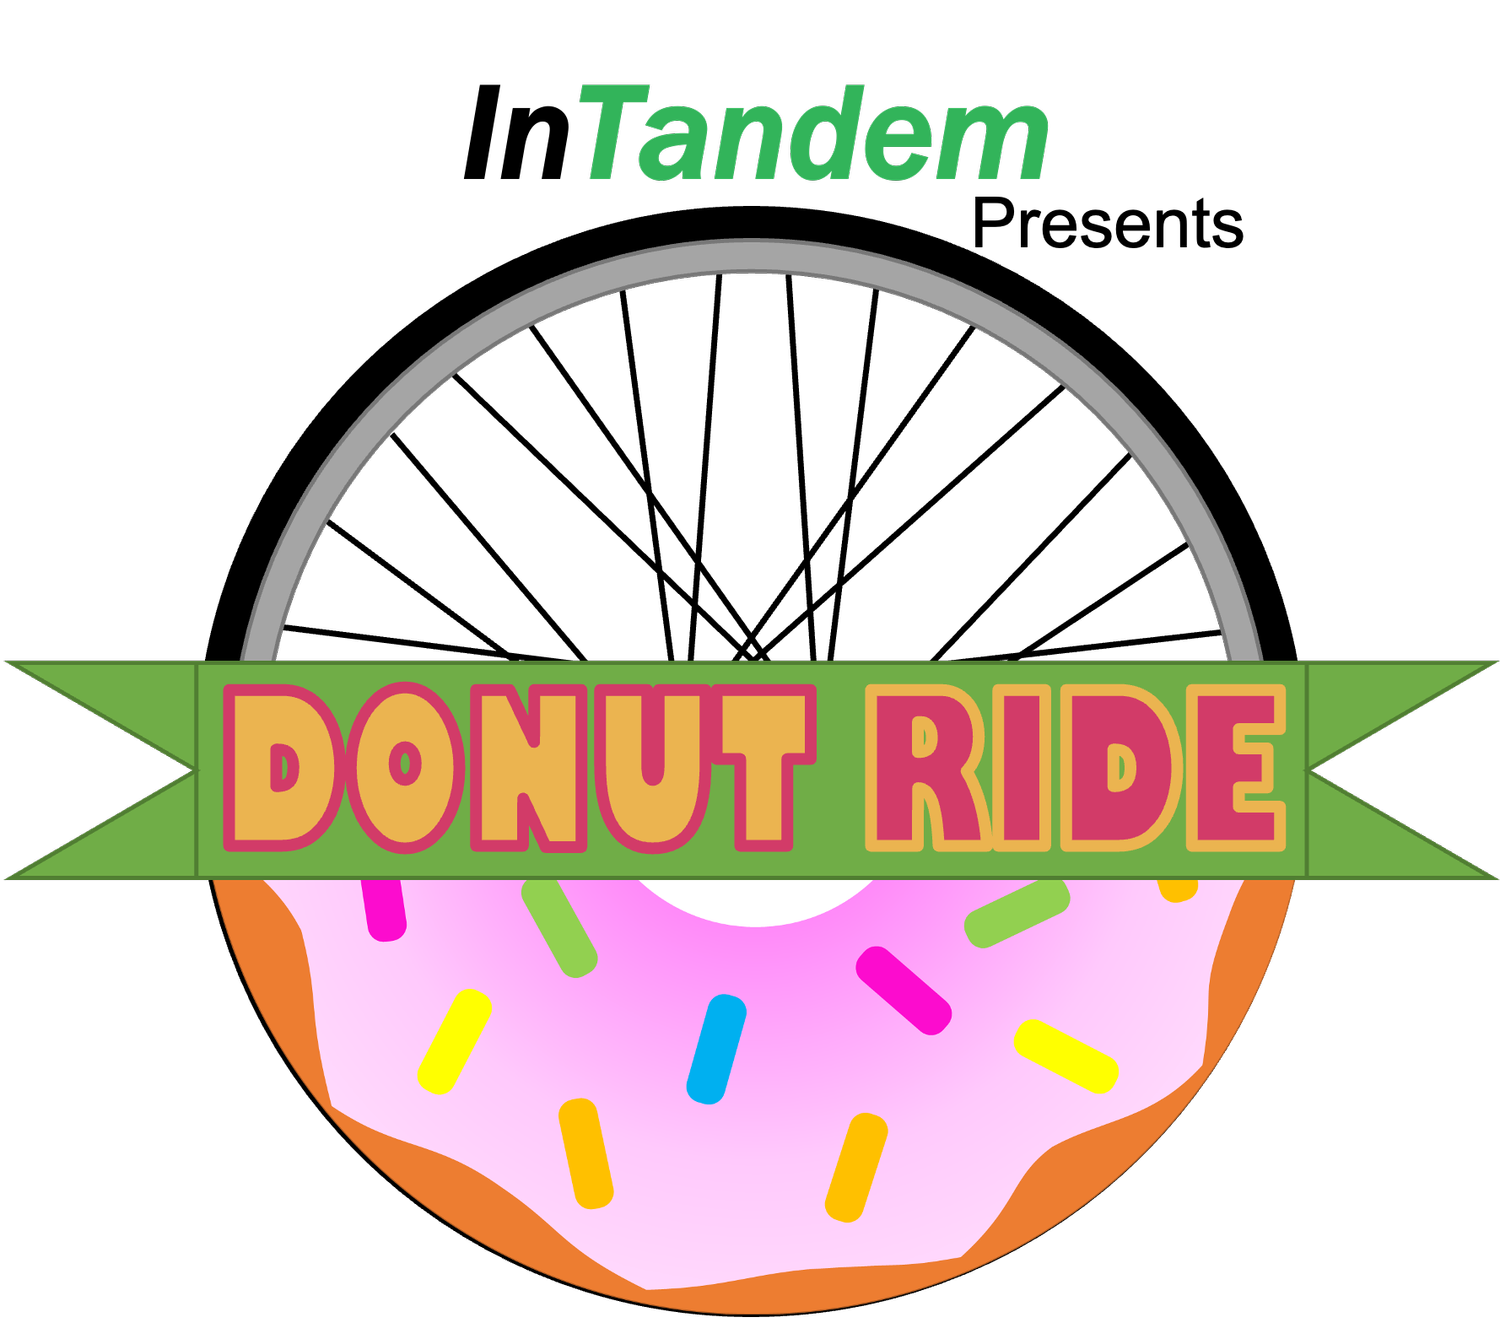 Sept. 30th The Donut Ride NYC